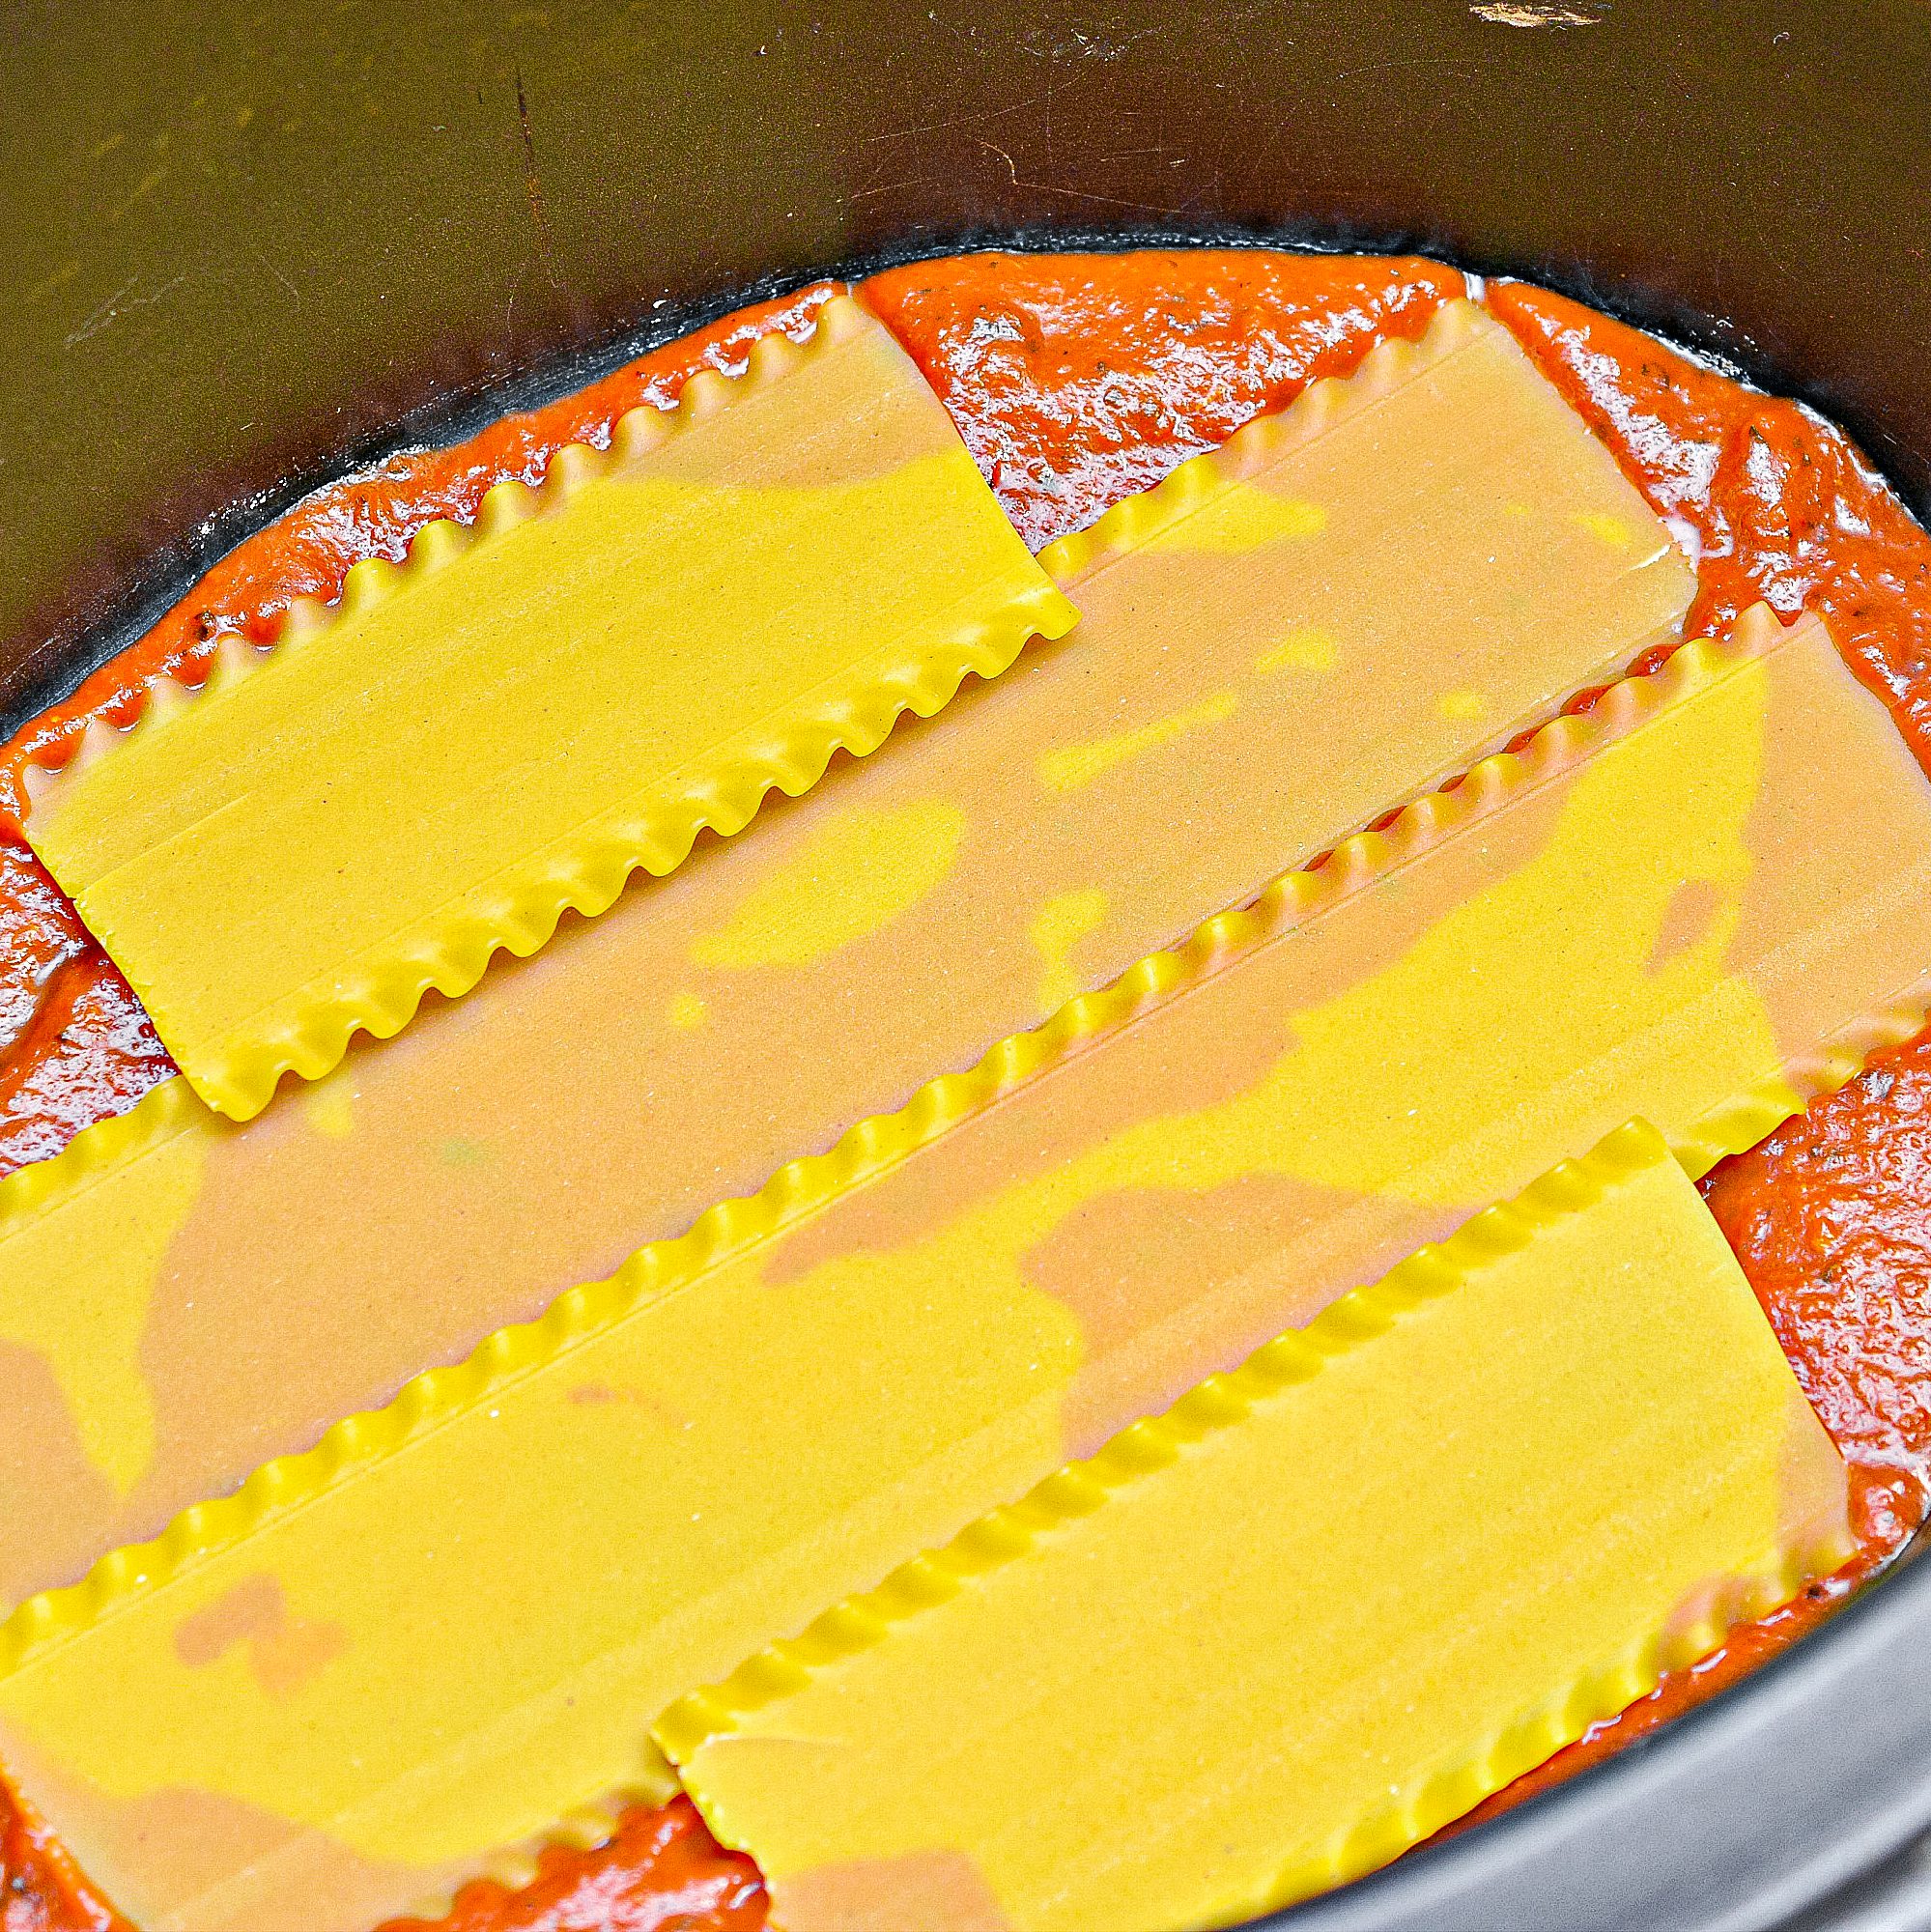 Place a thin layer of pasta sauce in the bottom of the crockpot, and layer 3-4 lasagna noodles on top of it.